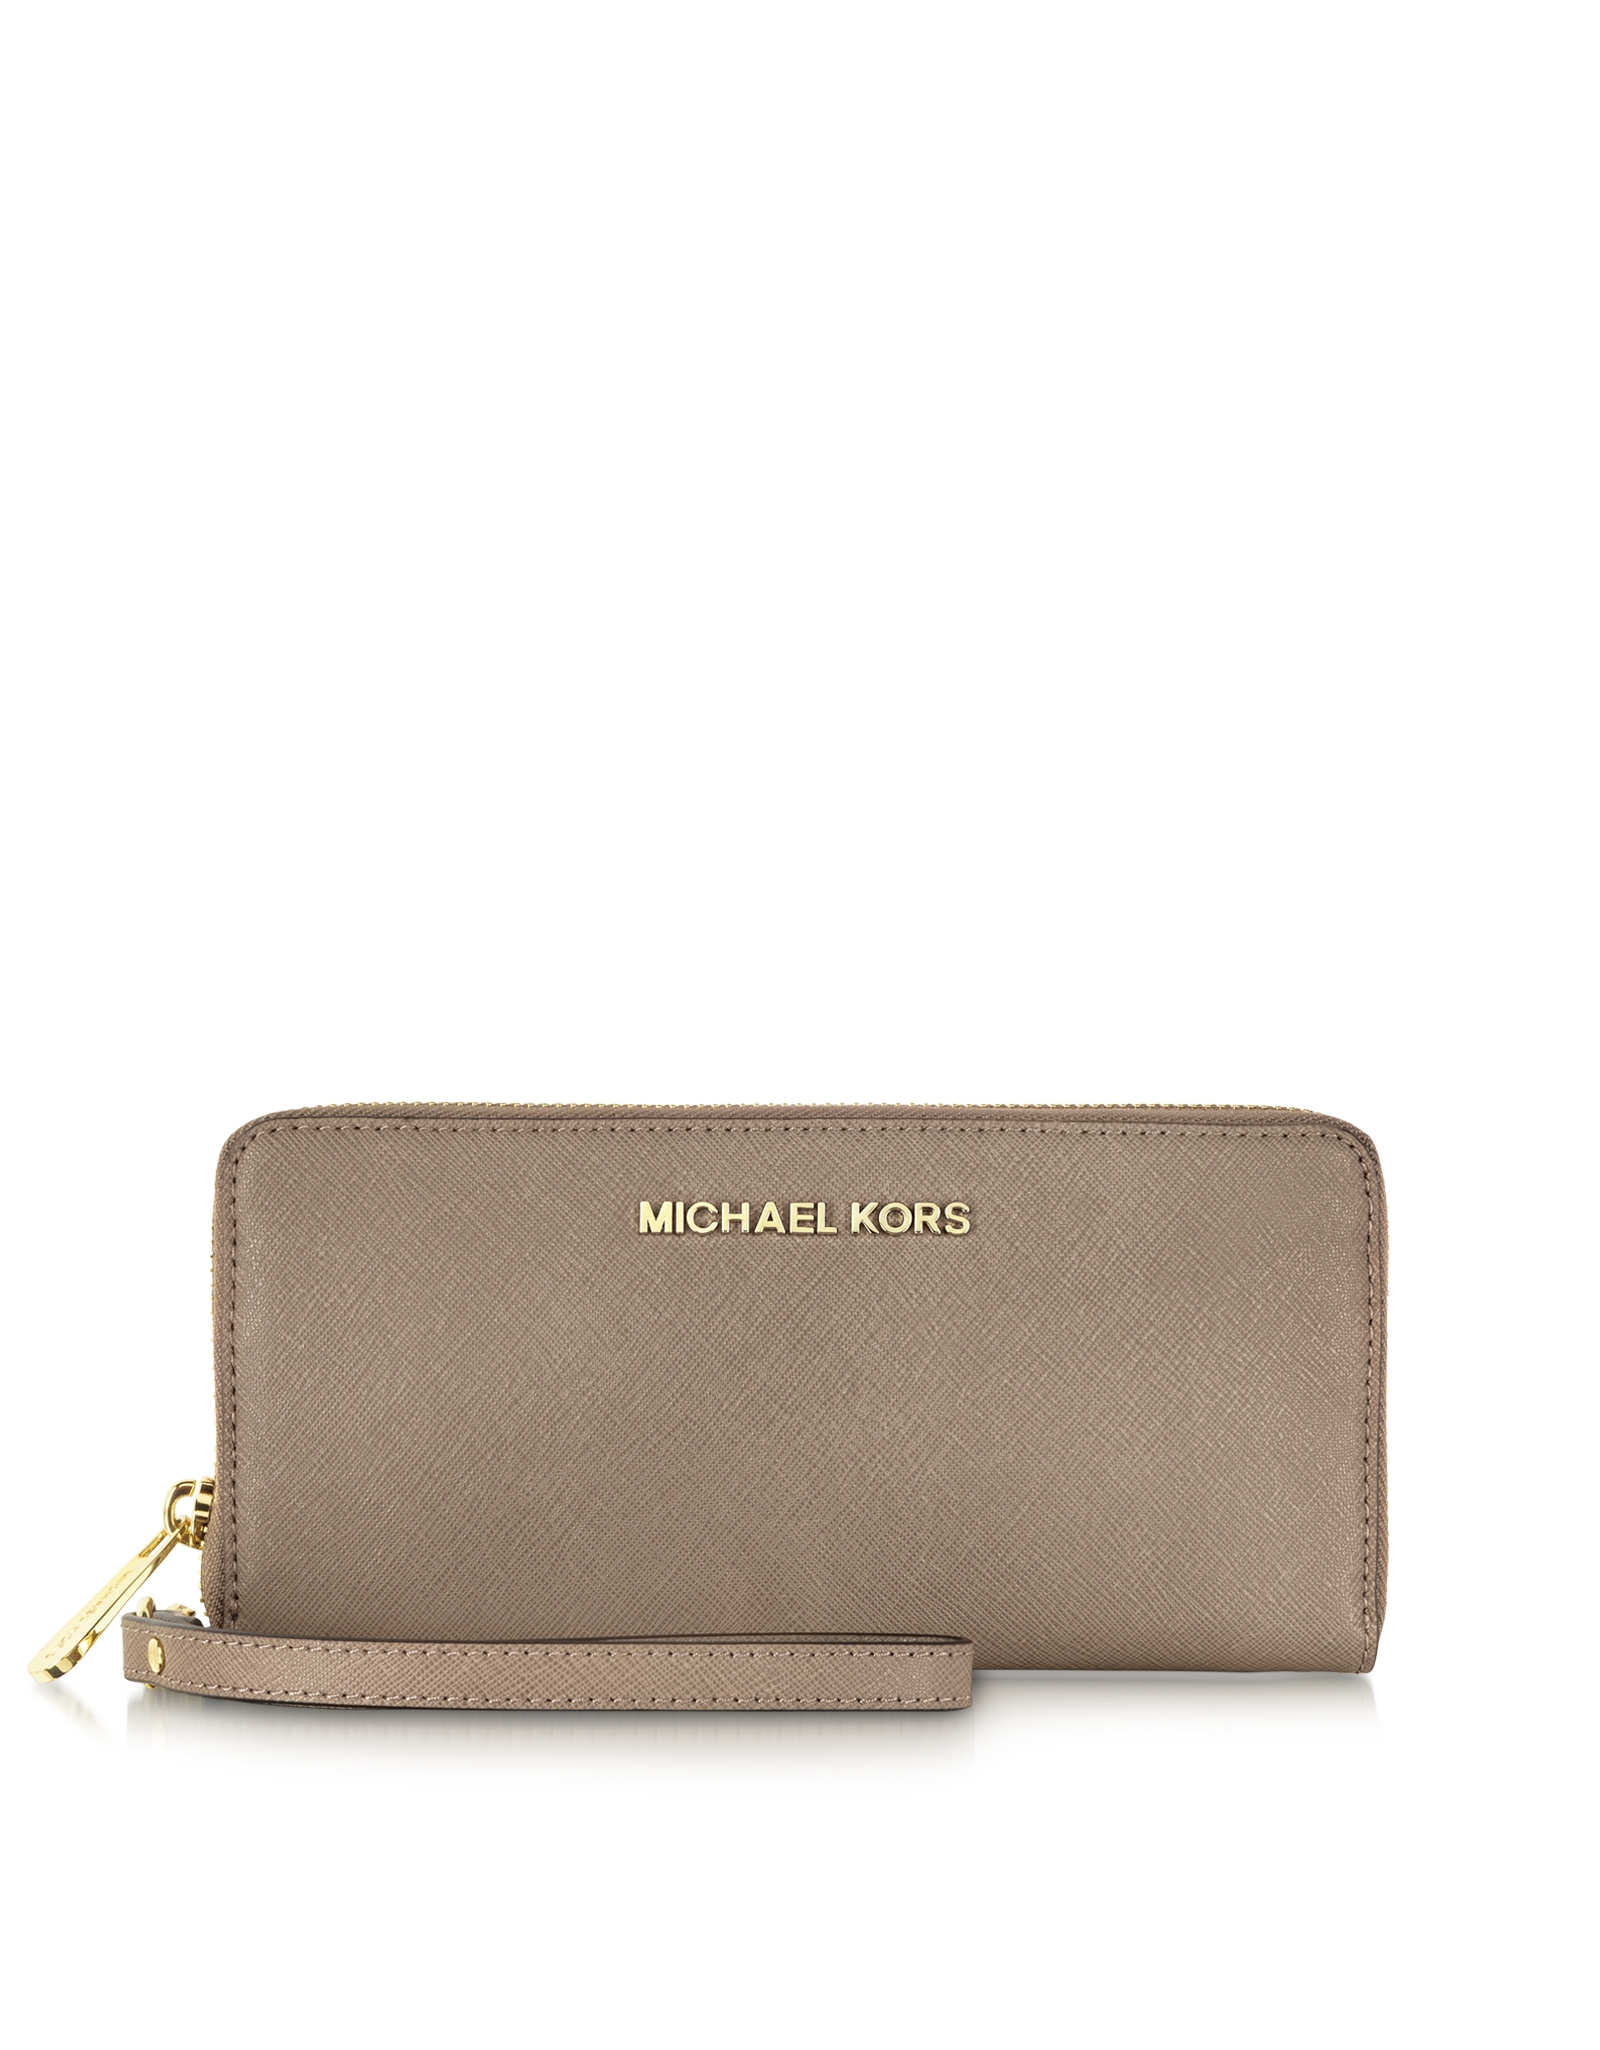 Lyst - Michael Kors Jet Set Travel Continental Wallet in Natural